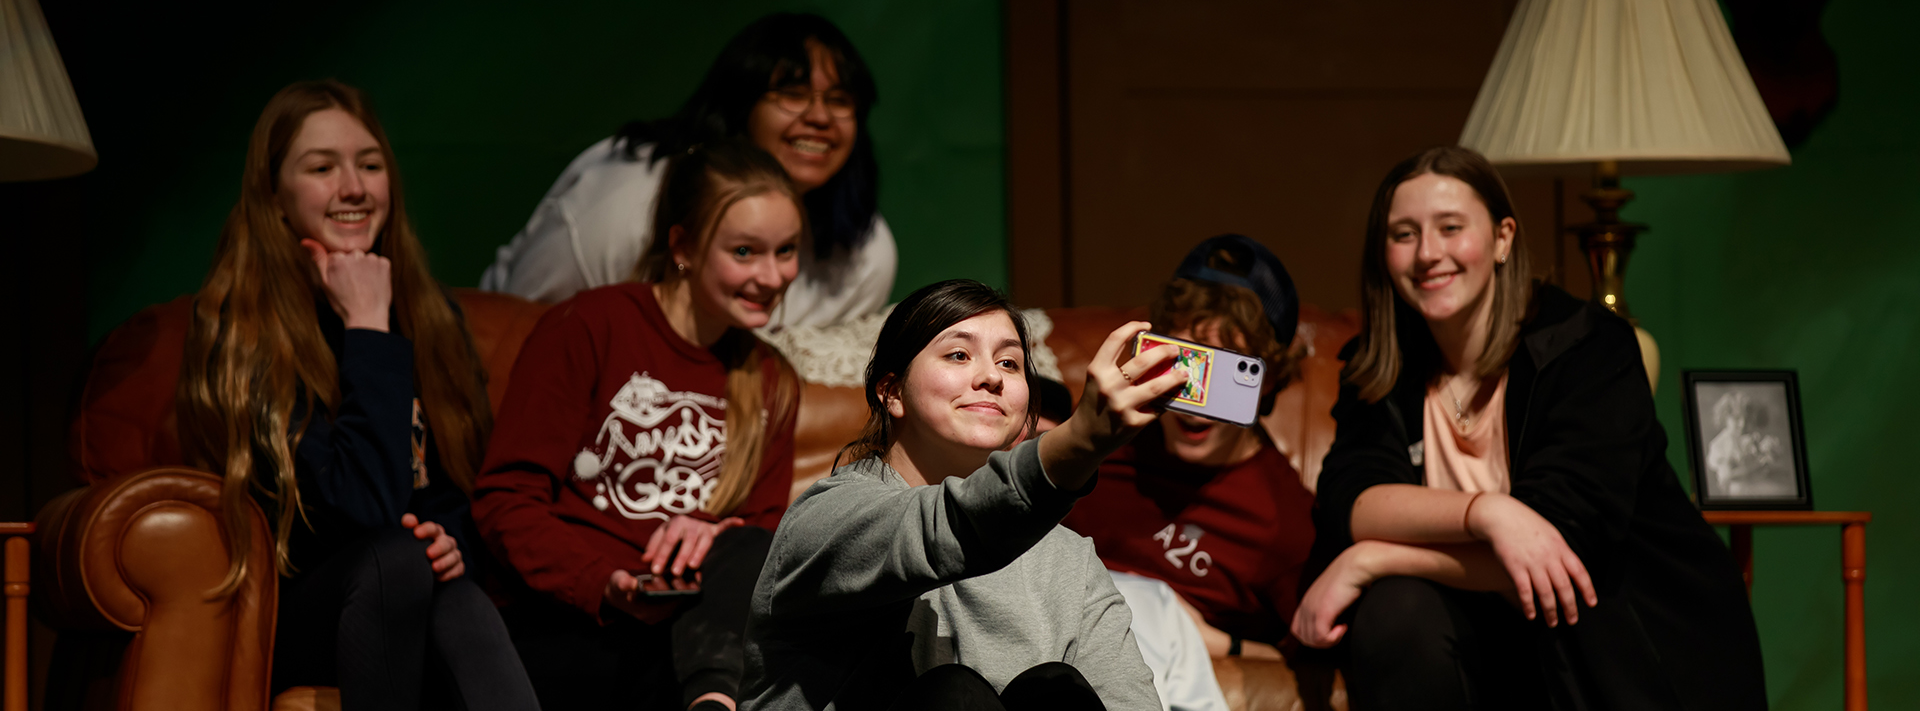 A CHS student sits on stage and frames a selfie with friends.